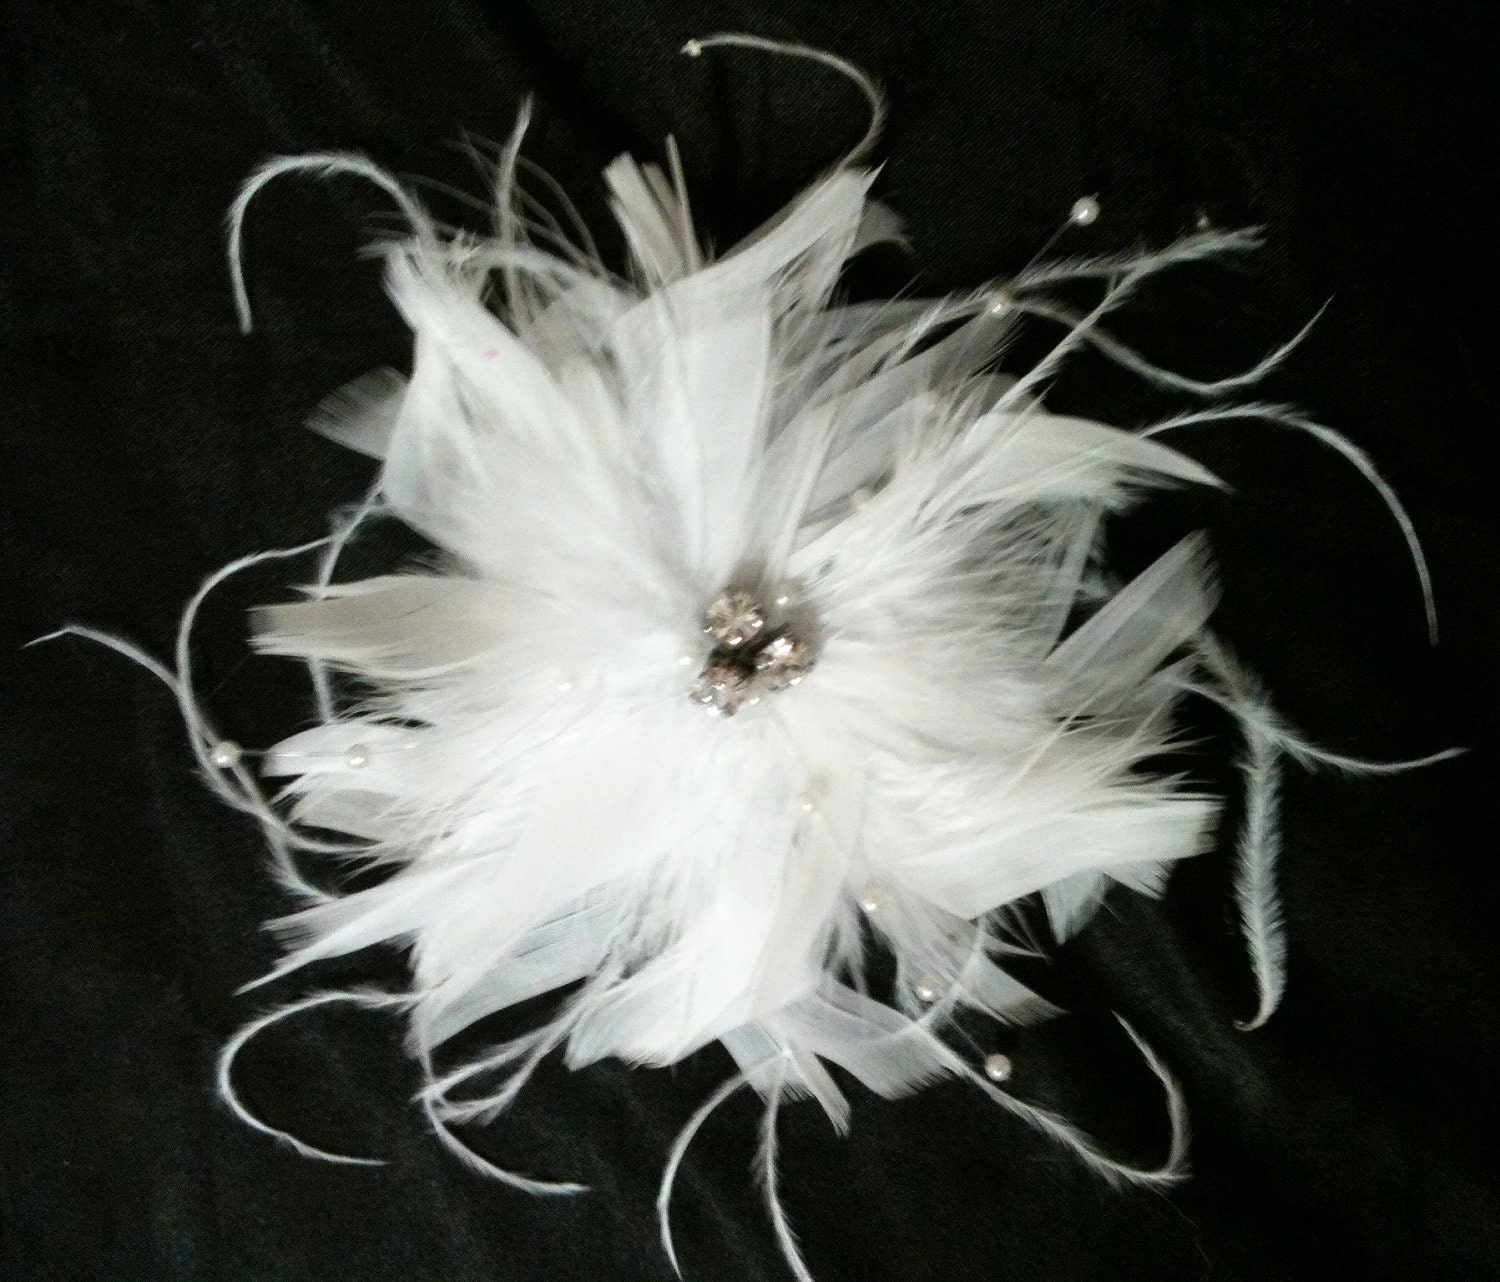  Wedding Hair Piece Swarovski Crystal BLING Pearl Accents Bride Feathers